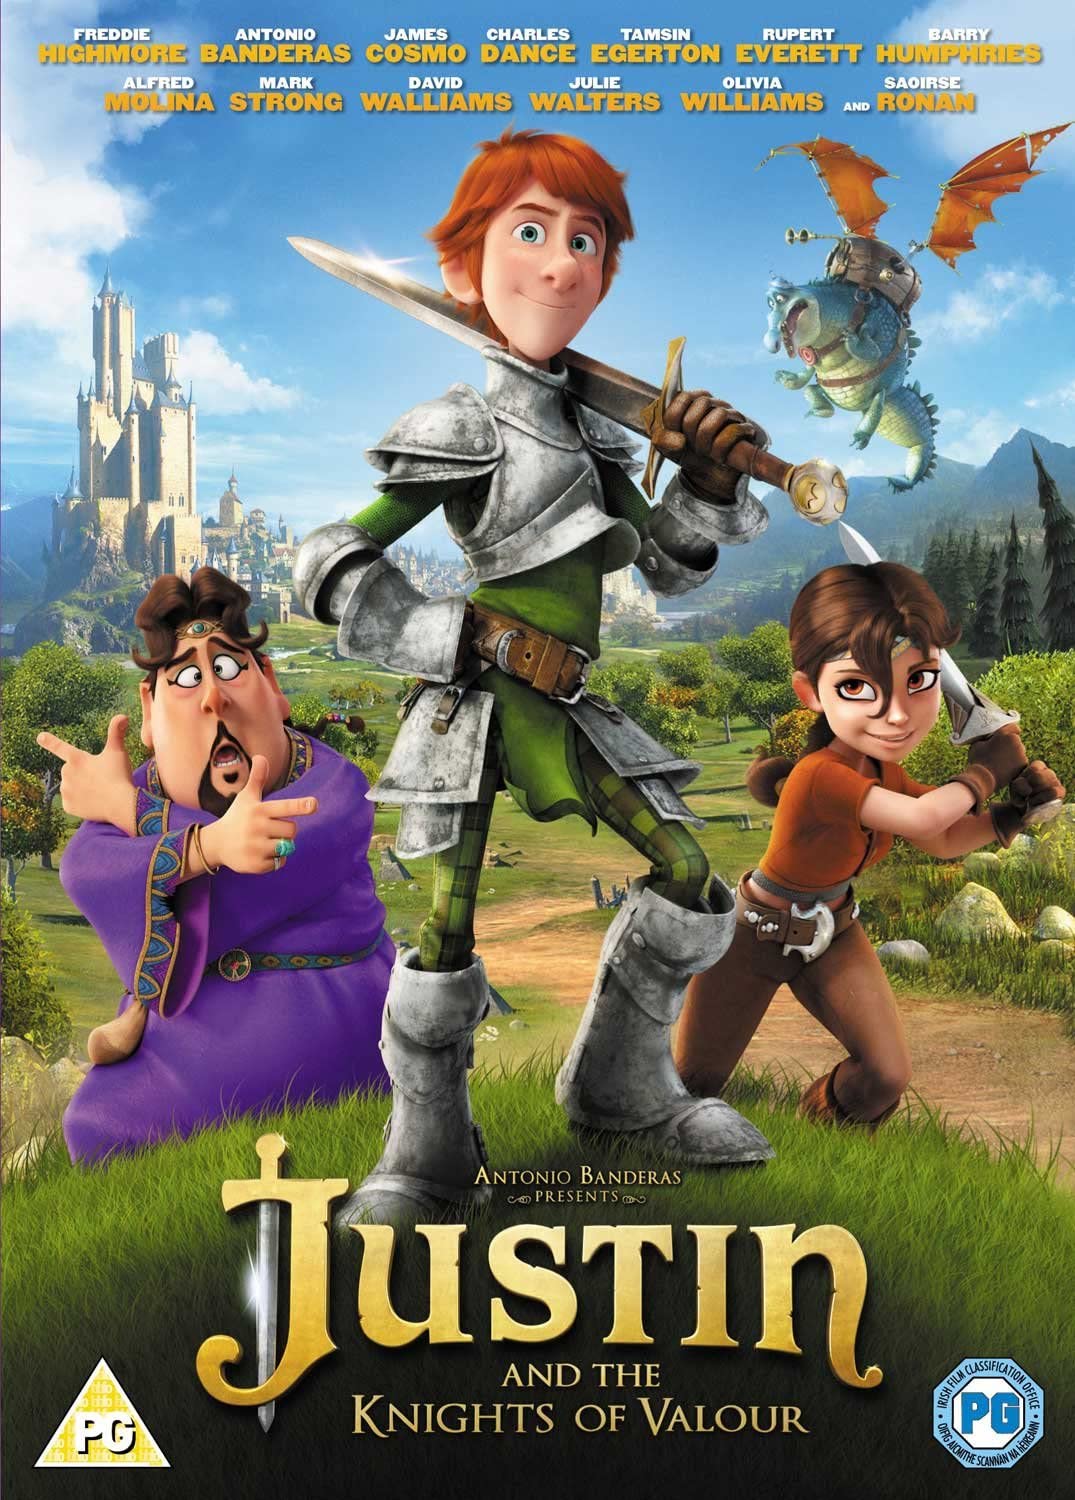 Justin and the Knights of Valour - Adventure/Family [DVD]